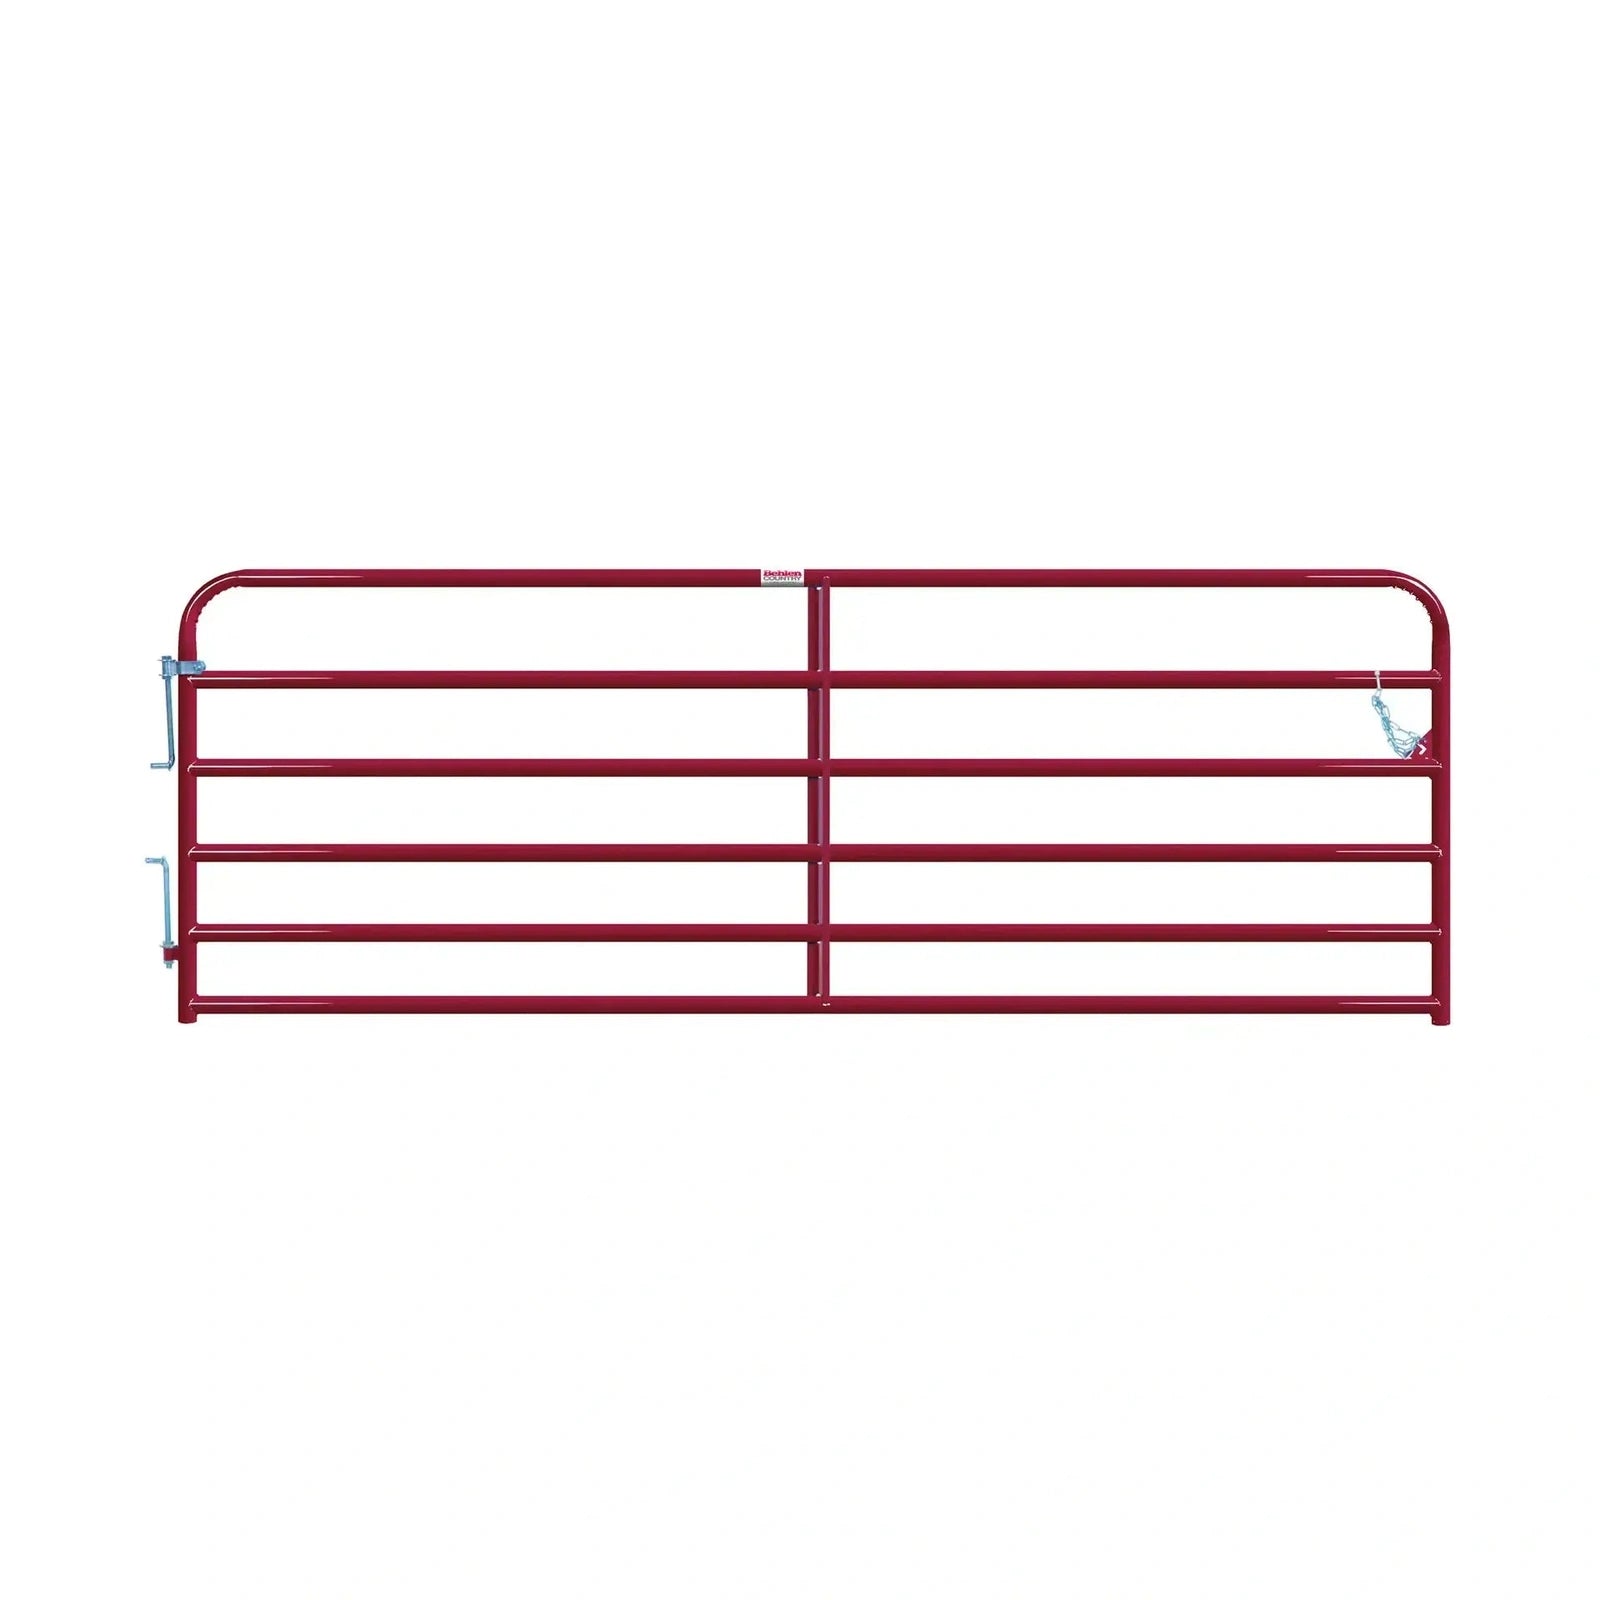 Behlen Country - High Resistance Tubular "Bull" Farm Gate in Painted Steel 